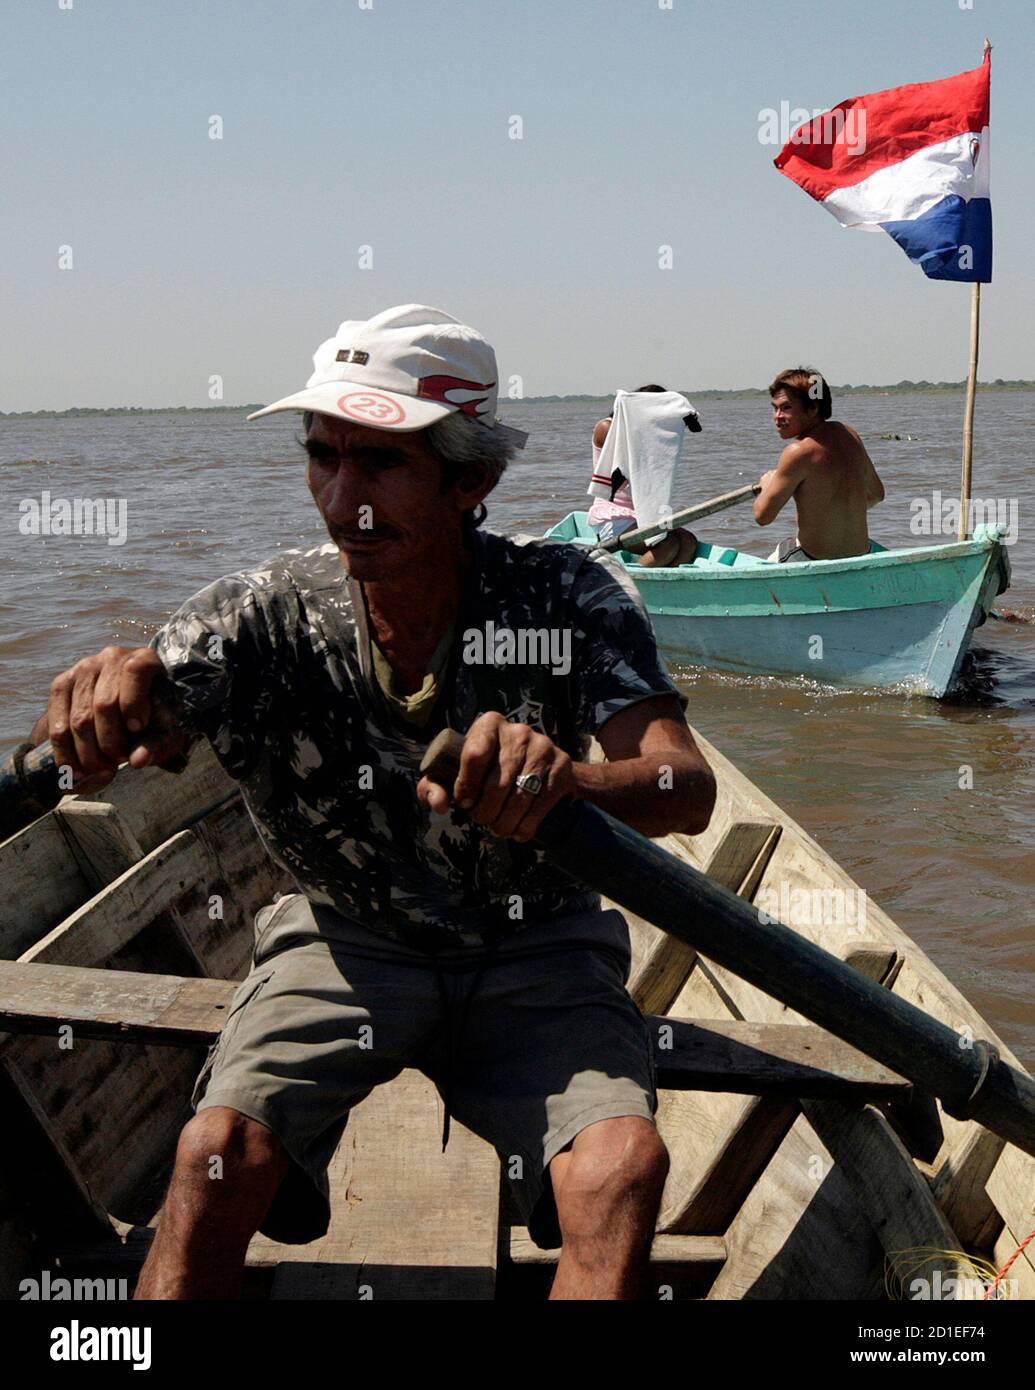 Fishermen block the Paraguay river in protest over the lack of payment of the annual subsidy that they receive from the government during the season when fishing is prohibited to protect the river stocks, in Asuncion November 21, 2008. Nearly 14,000 fishermen depend on the subside to survive during the off season from November 1 to December 20. REUTERS/Jorge Adorno (PARAGUAY) Stock Photo